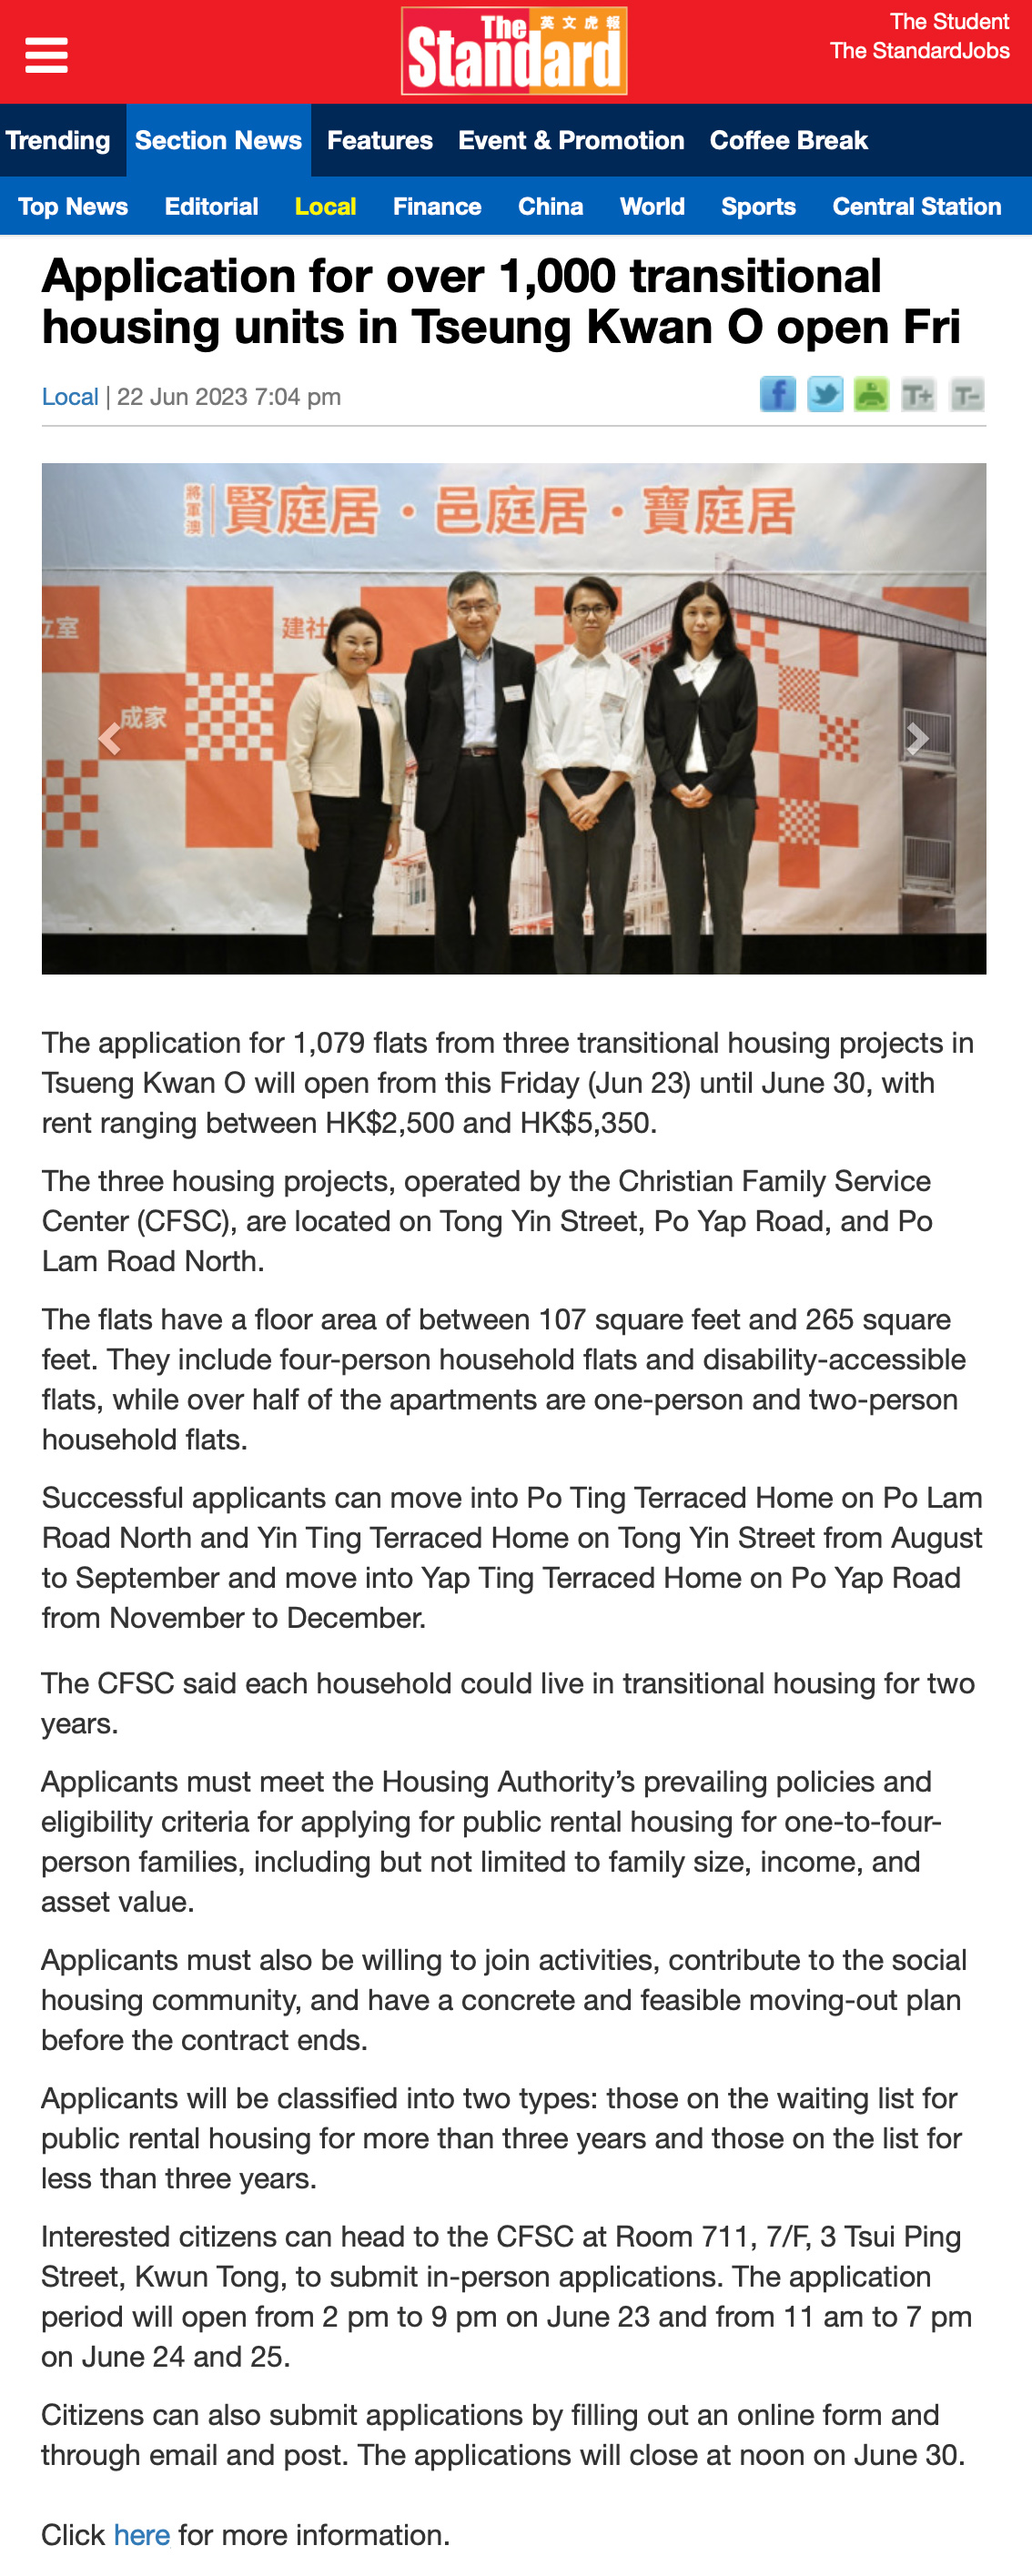 HK Standard - Application for over 1000 transitional housing units in Tseung Kwan O open Fri